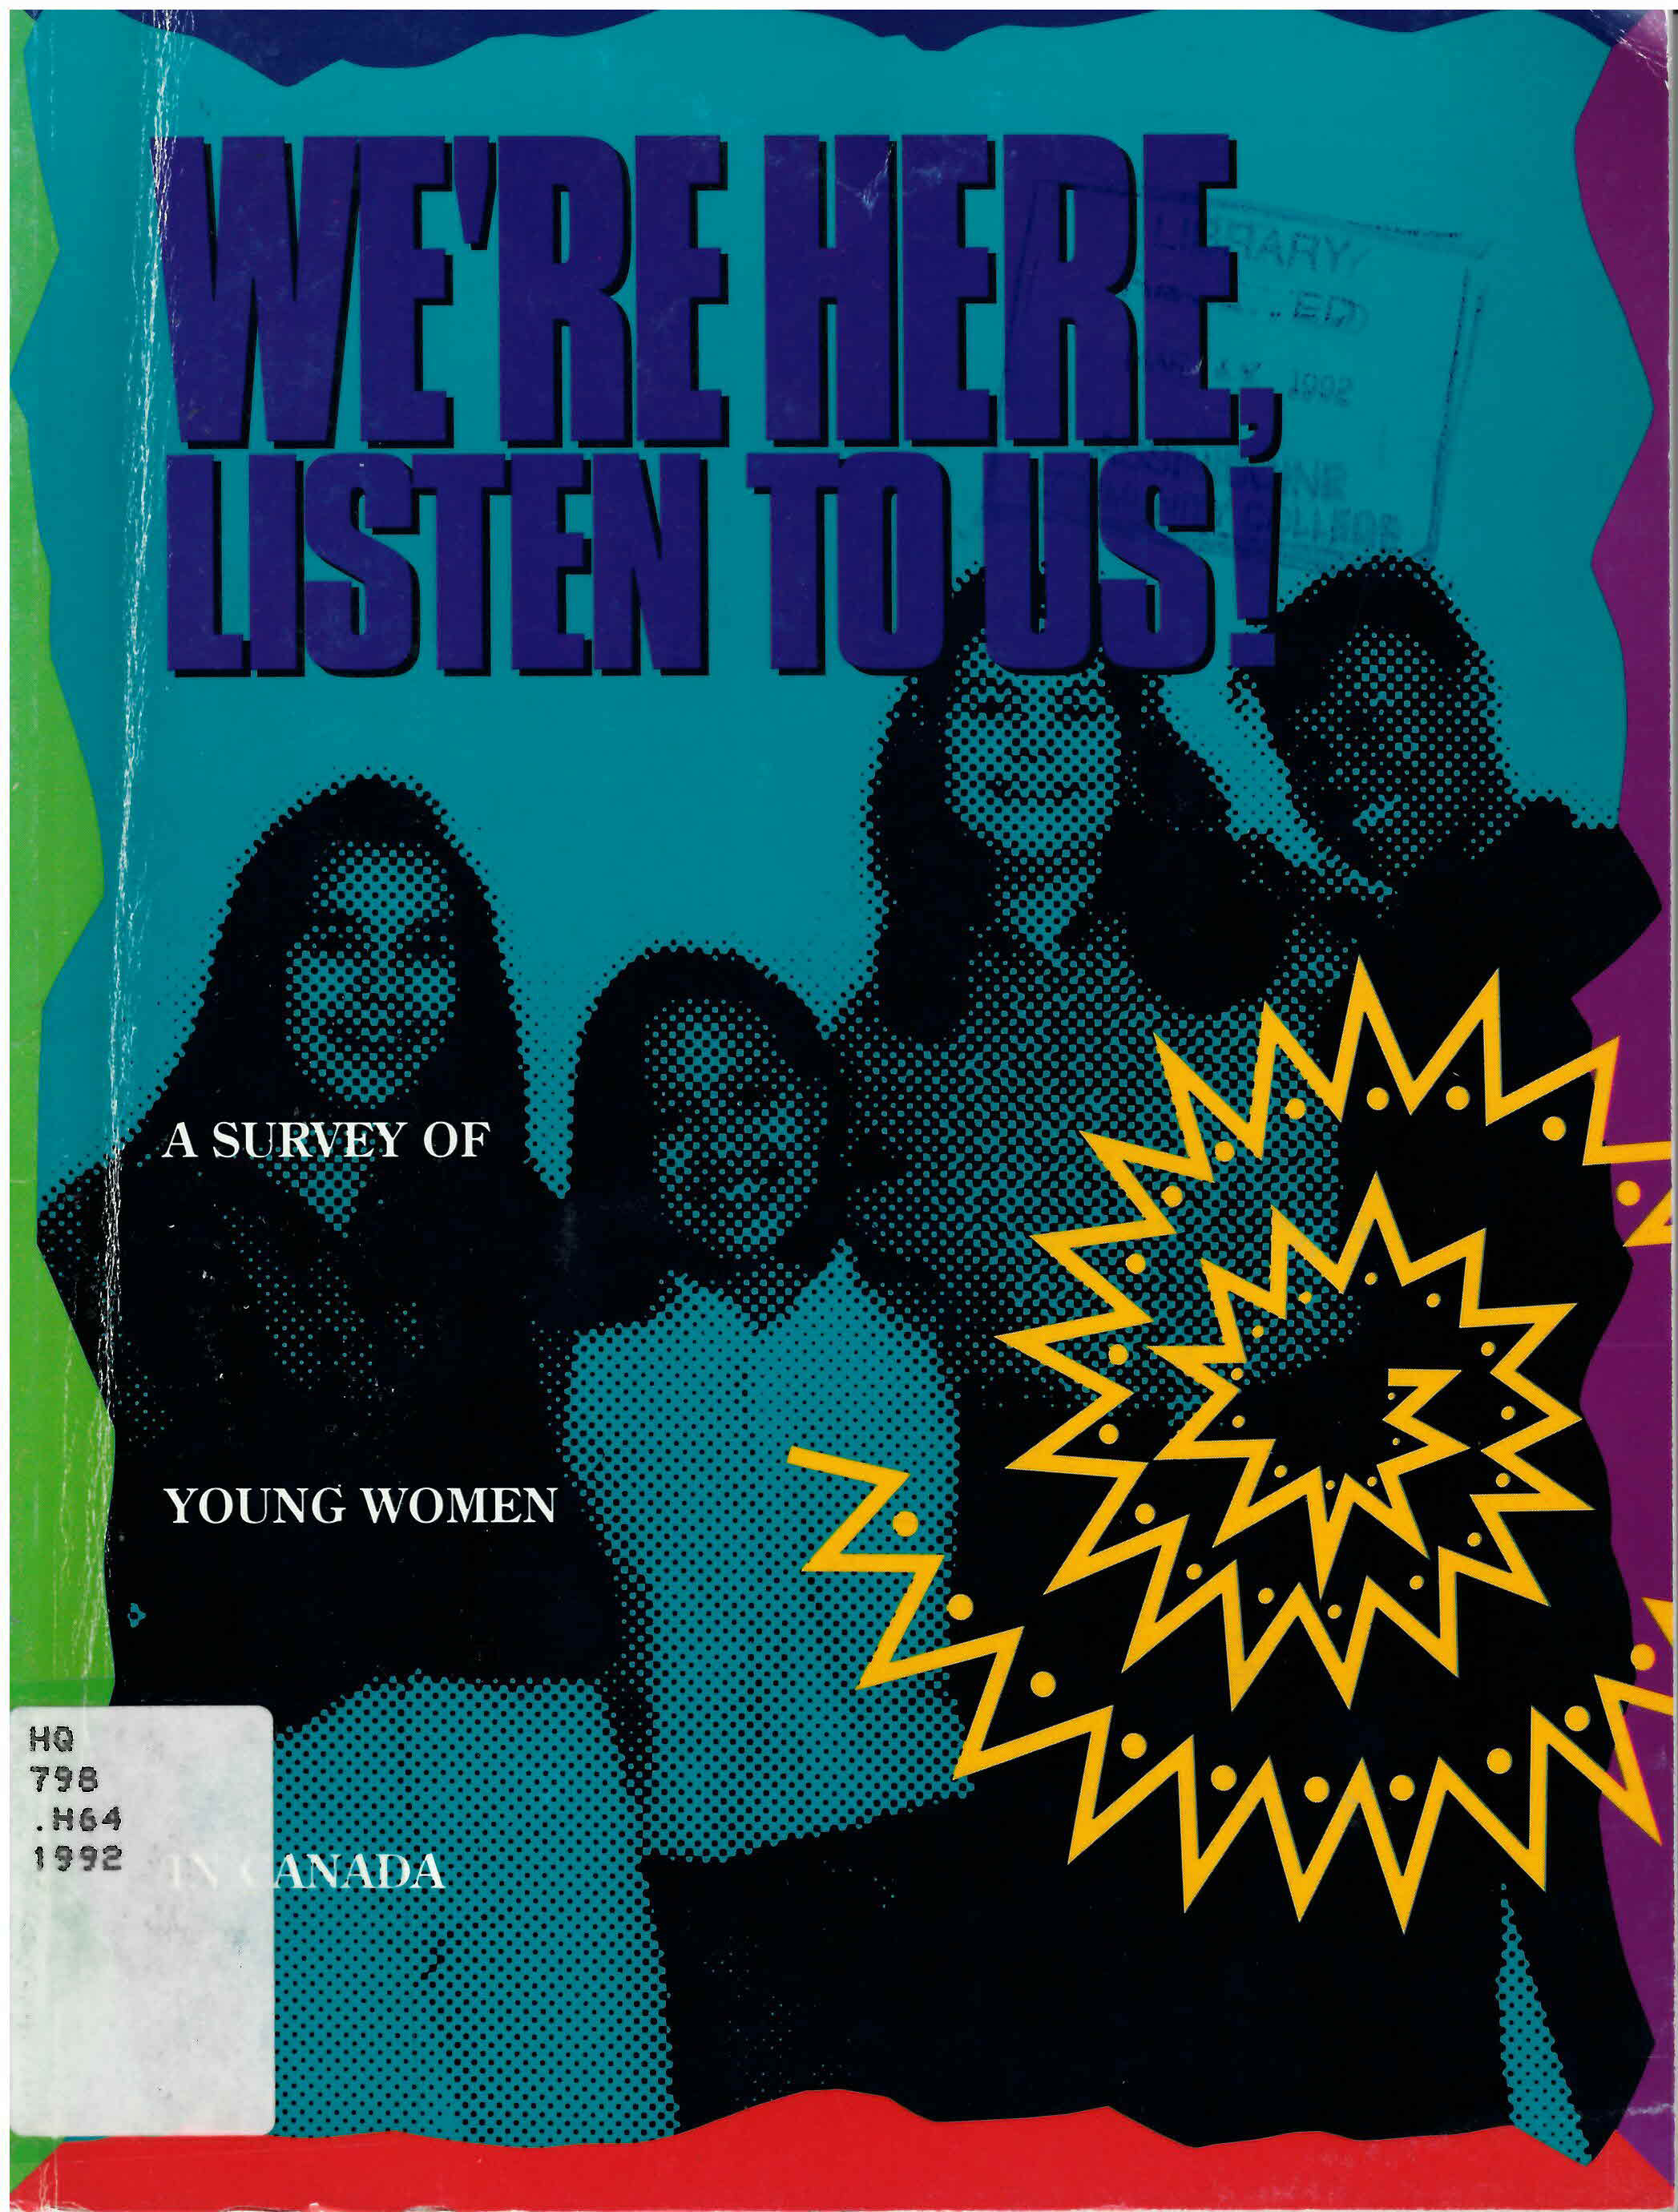 We're here, listen to us!: : a survey of young women in  Canada /